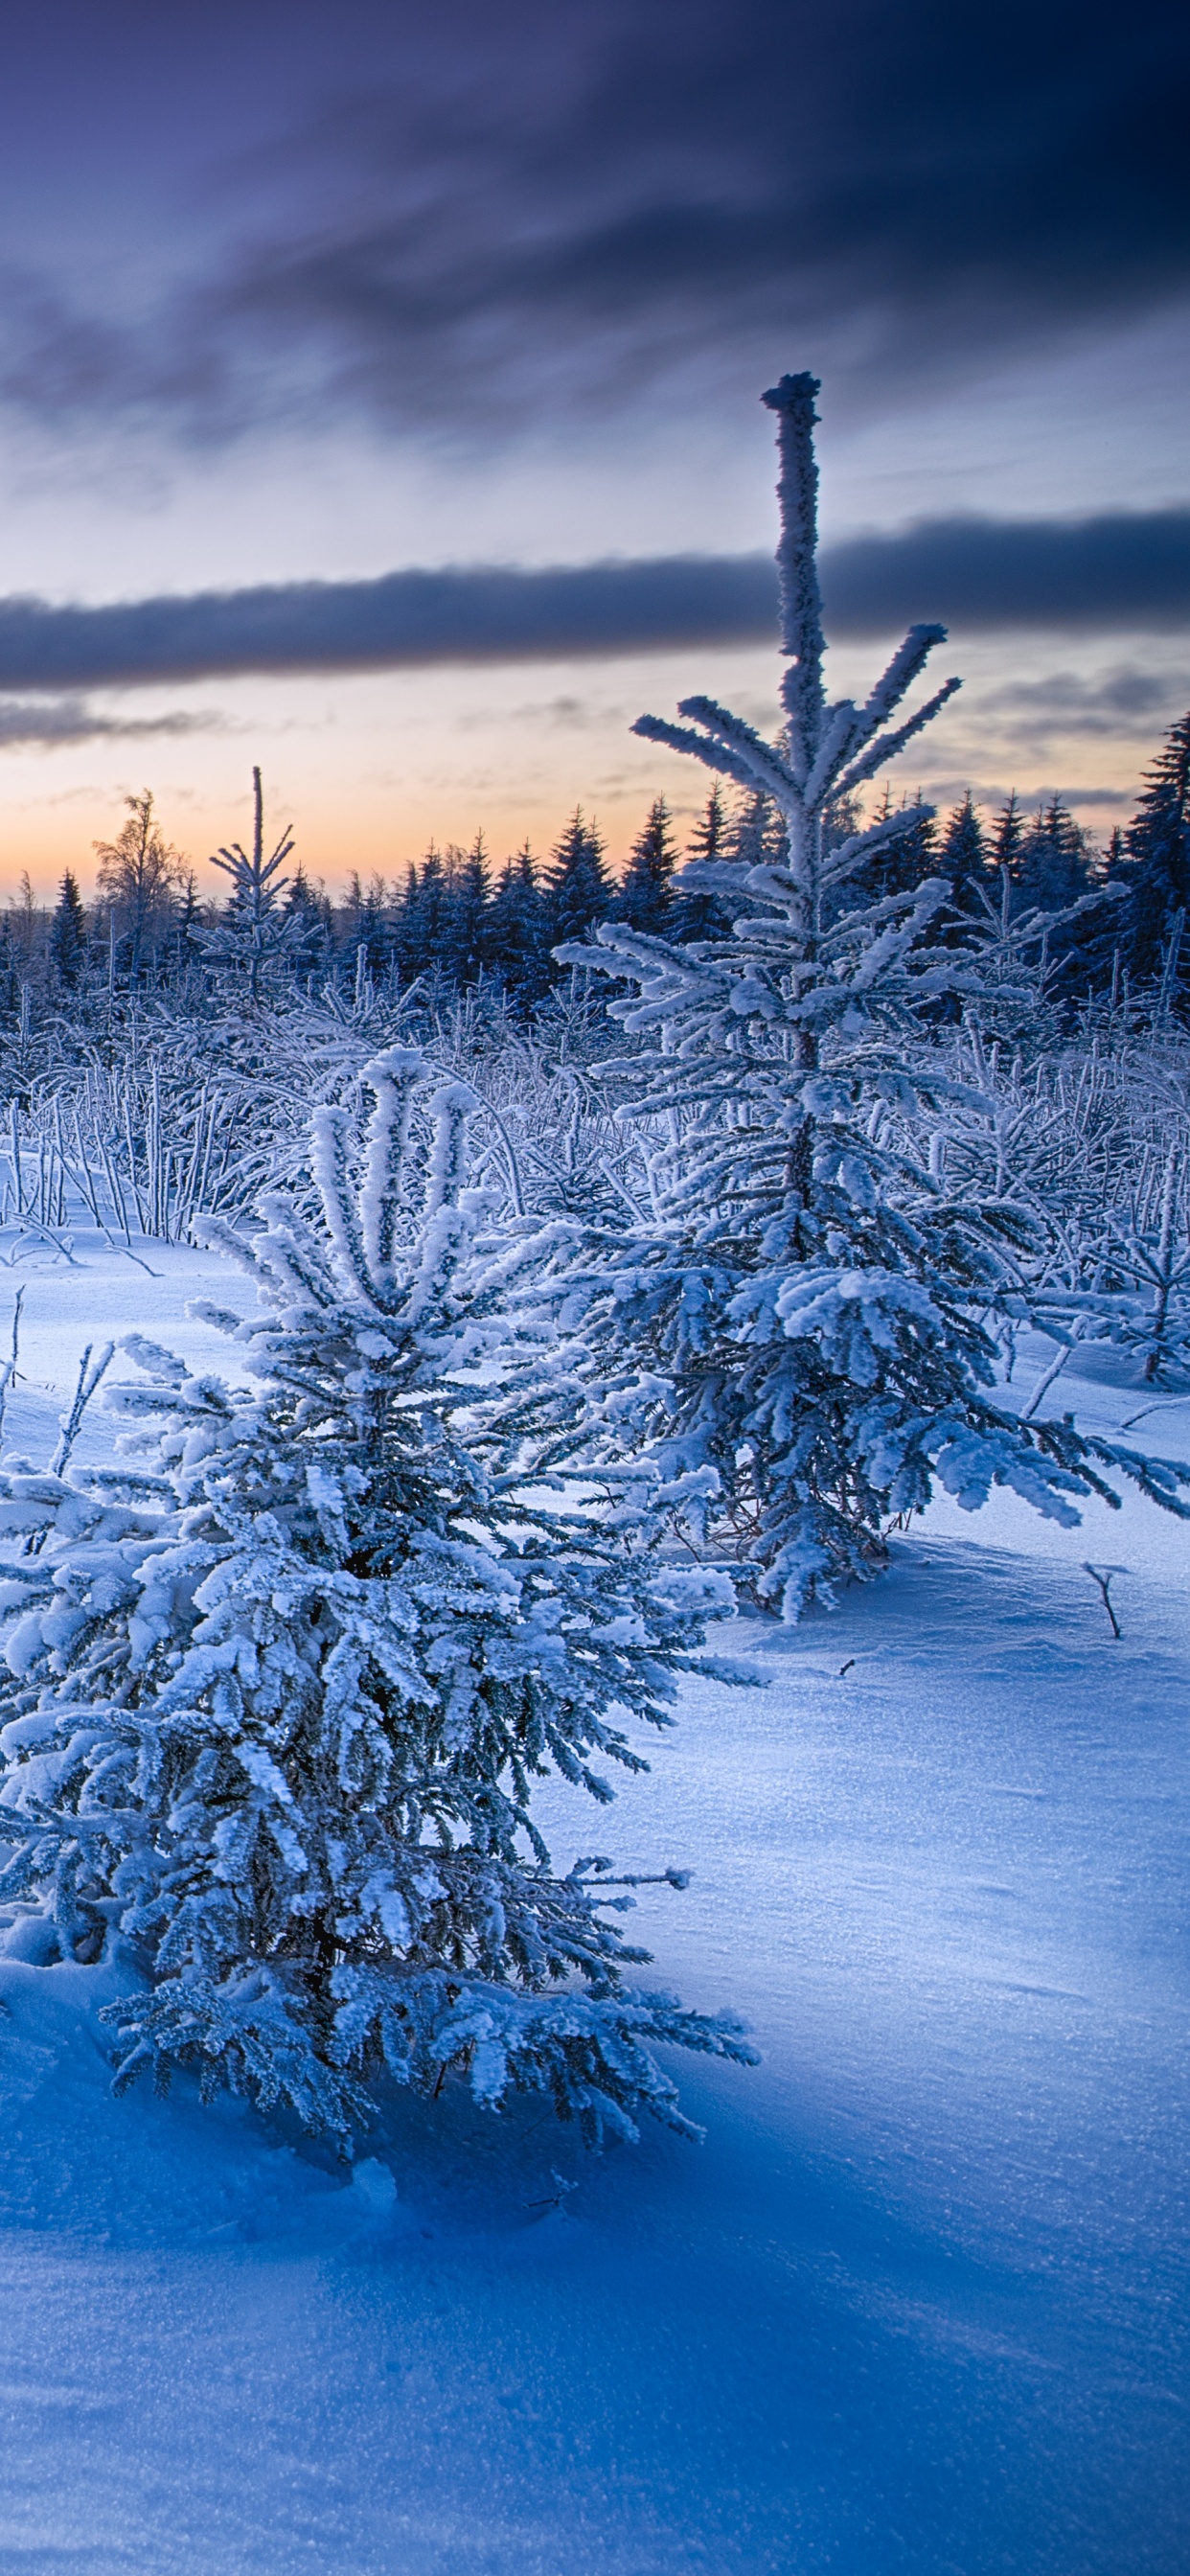 Snow Covered Field and Trees During Daytime. Wallpaper in 1242x2688 Resolution